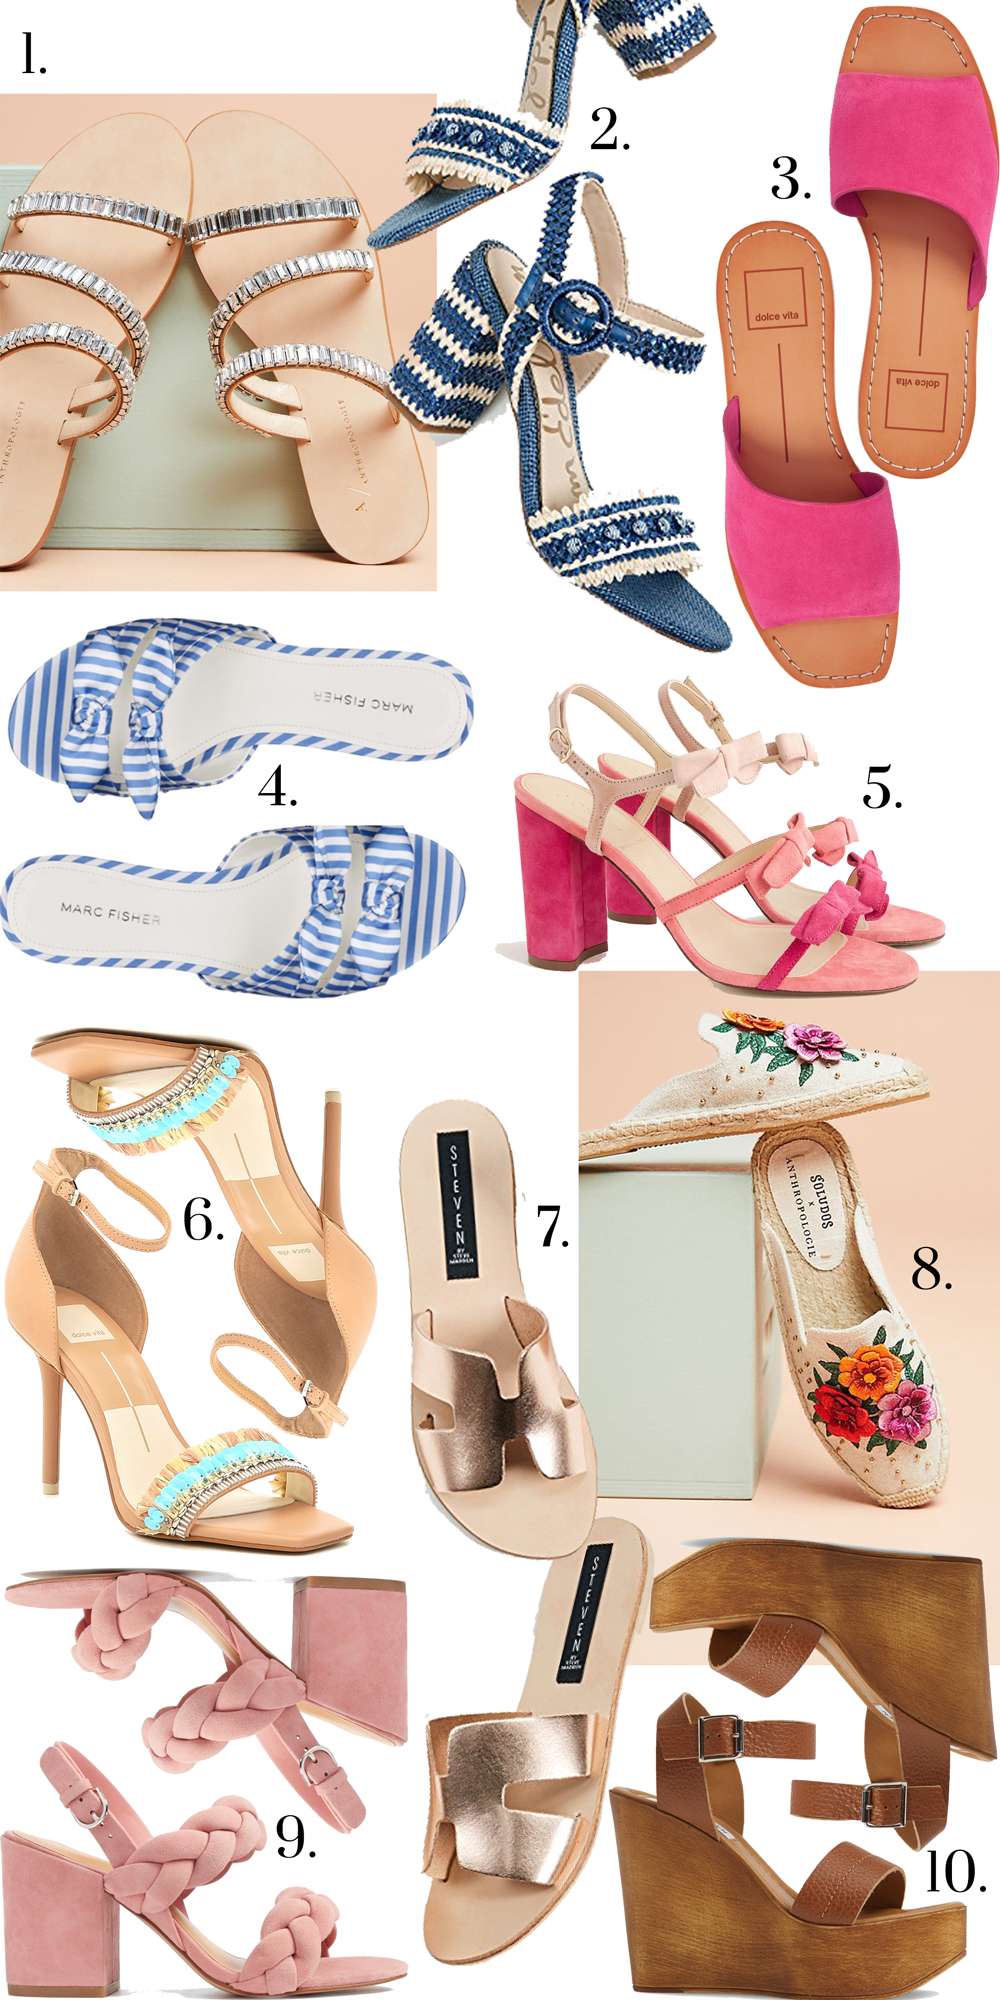 Shoes For Spring / Spring Shoe Styles 